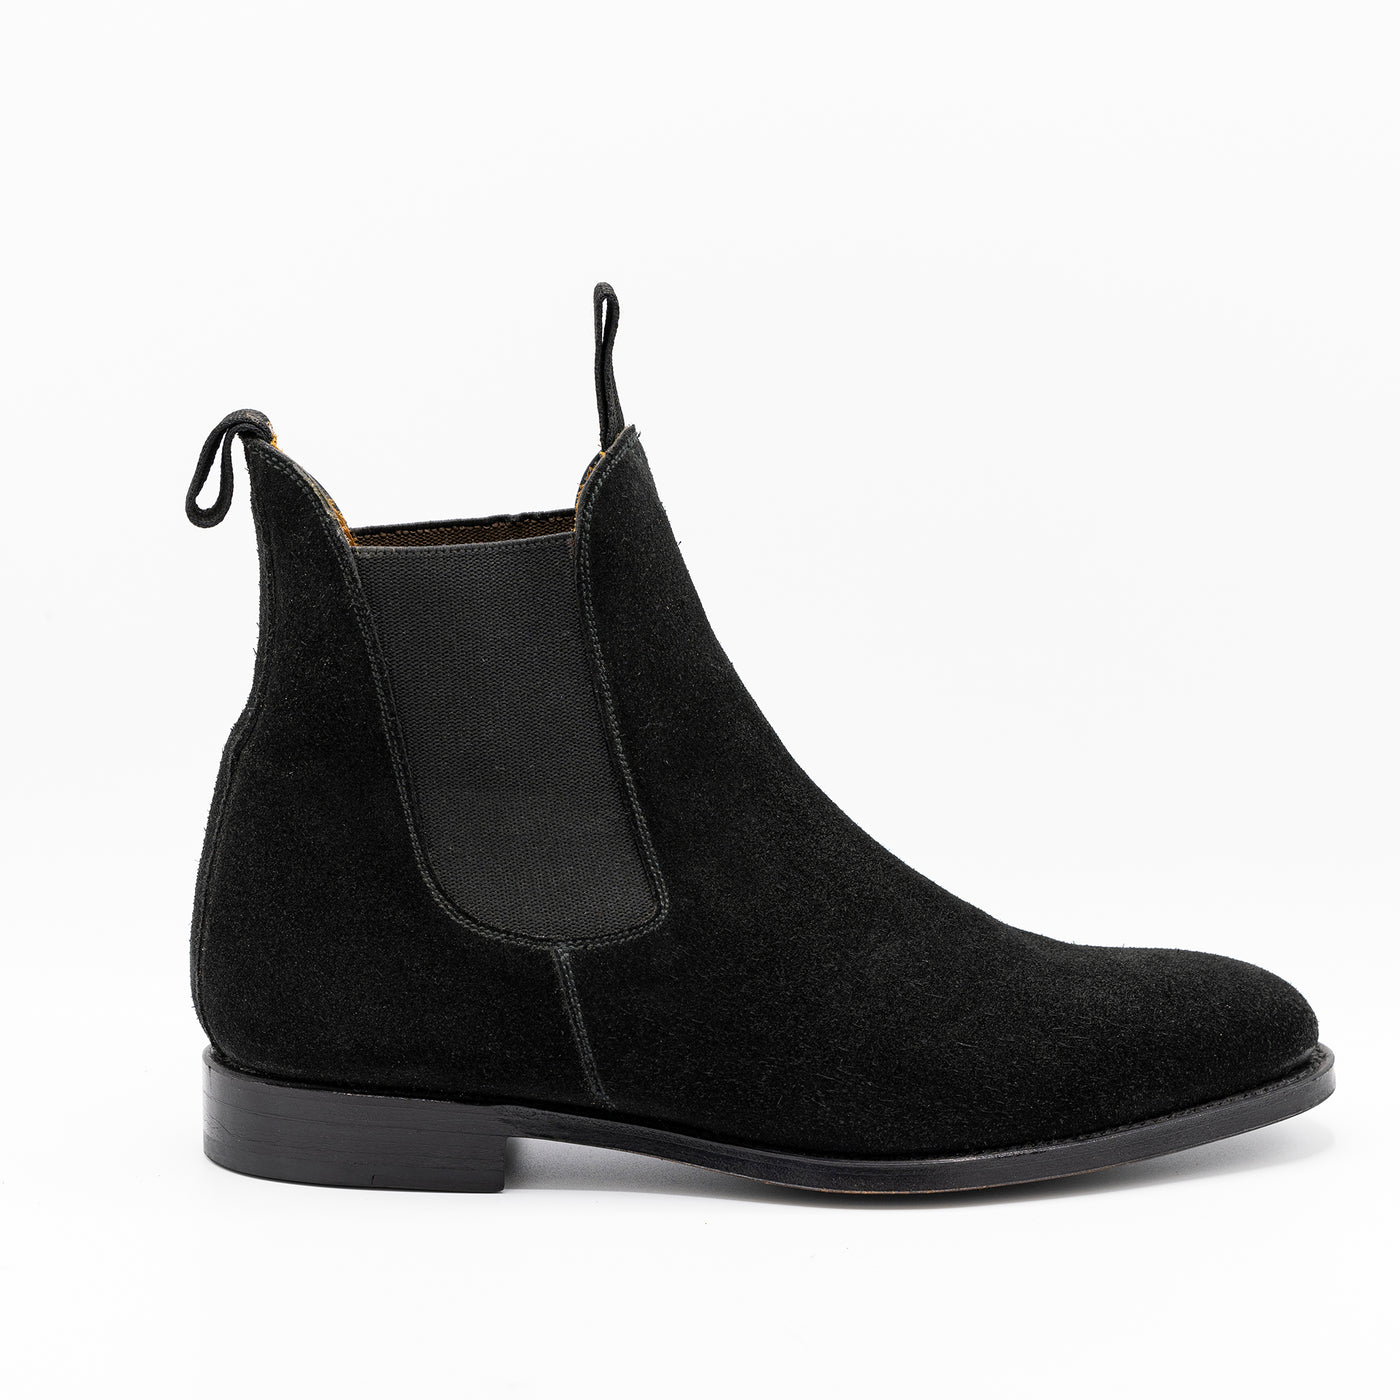 CHELSEA BOOTS in BLACK SUEDE BY MANO